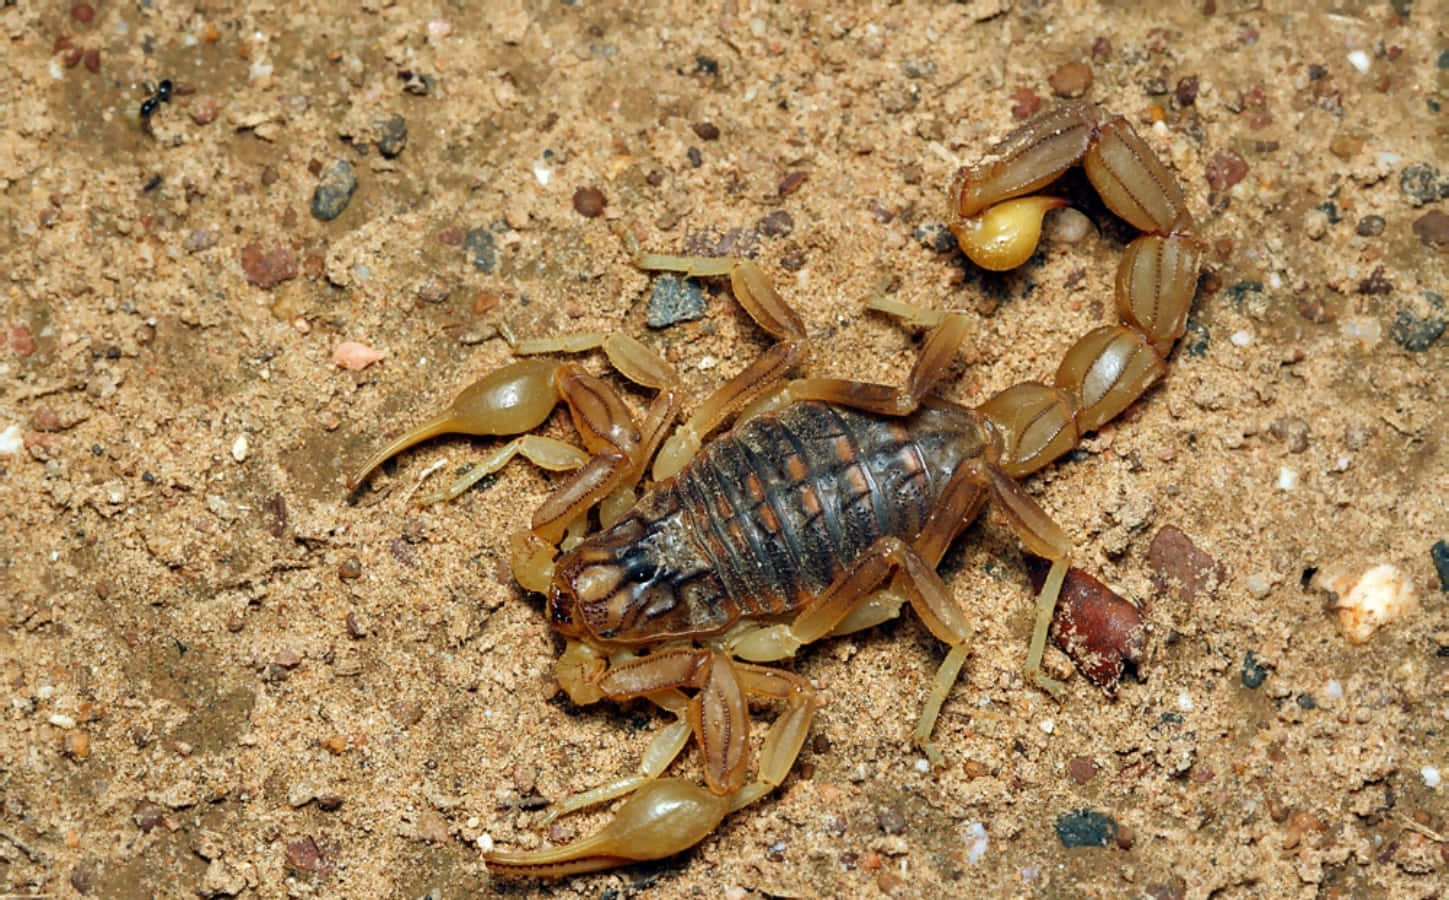 Look out for this dangerous scorpion!